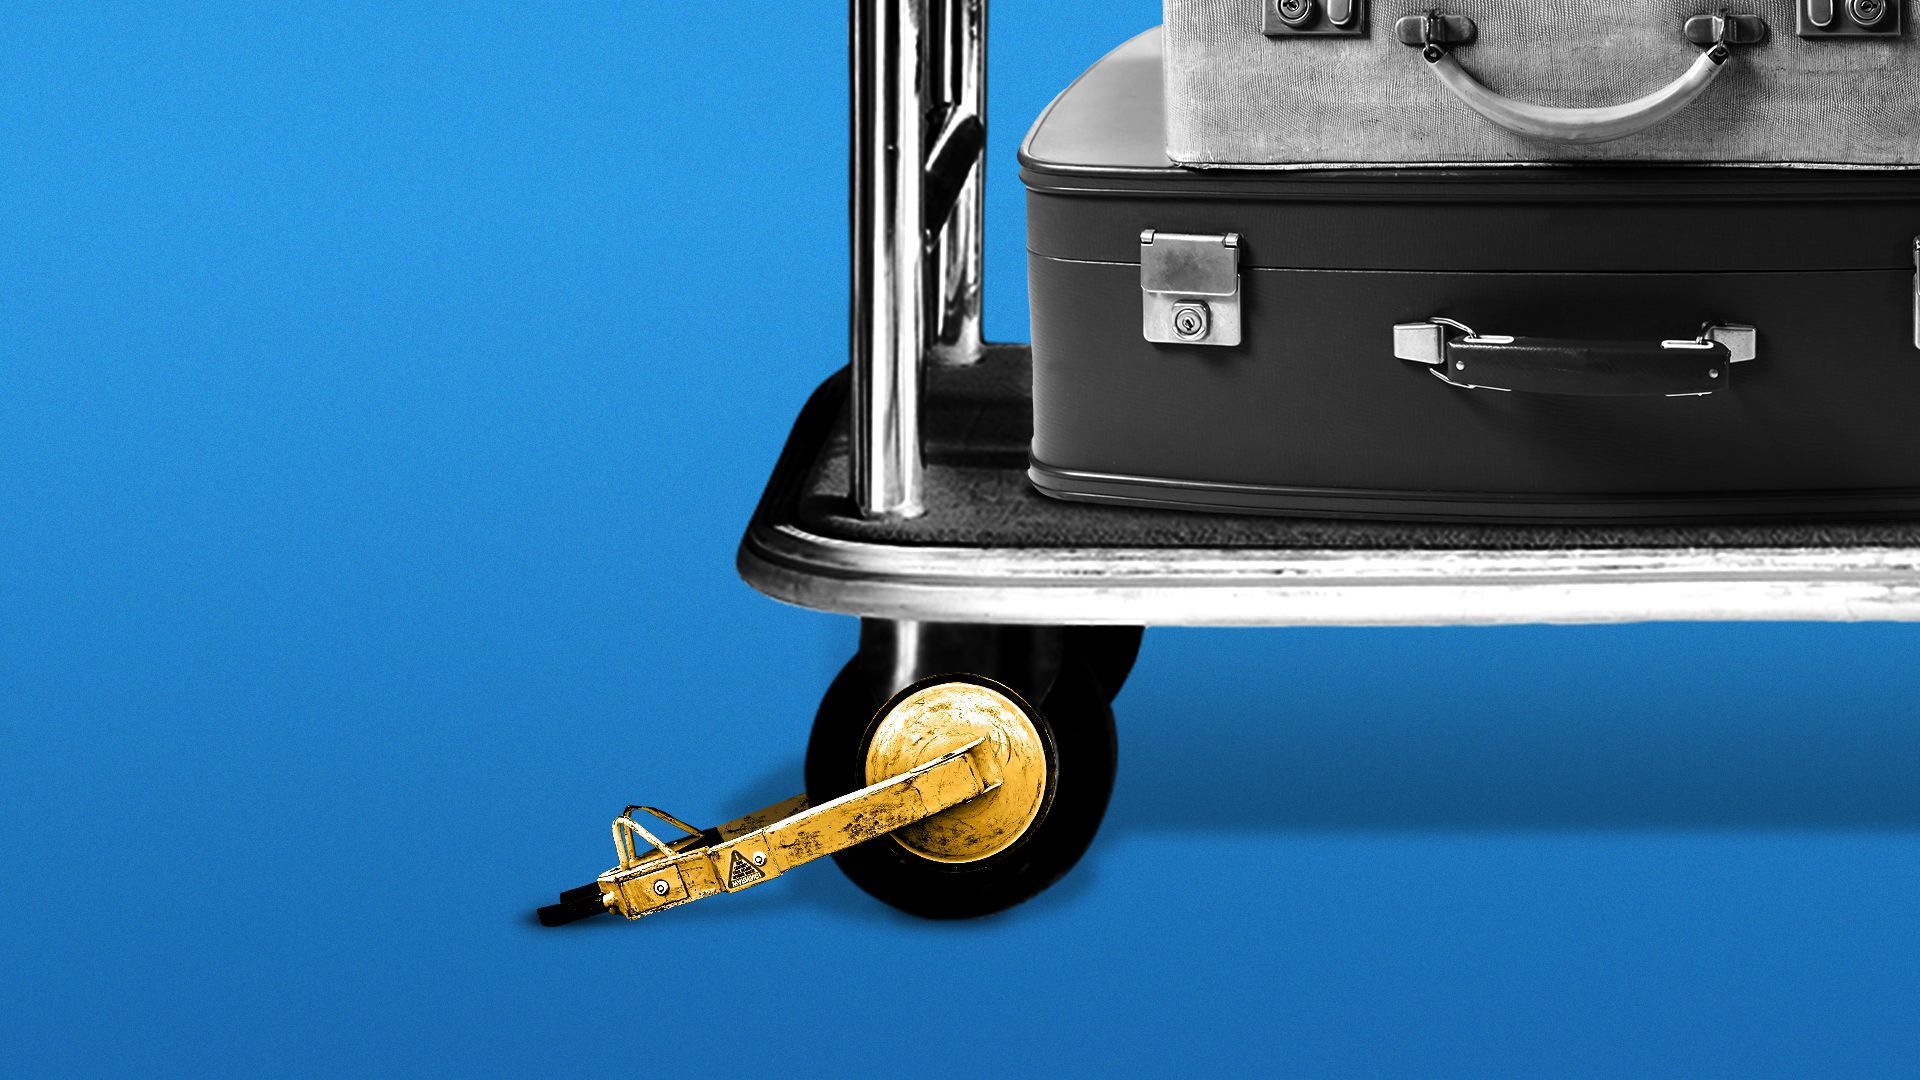 Illustration of a luggage cart with a car boot on the wheel.